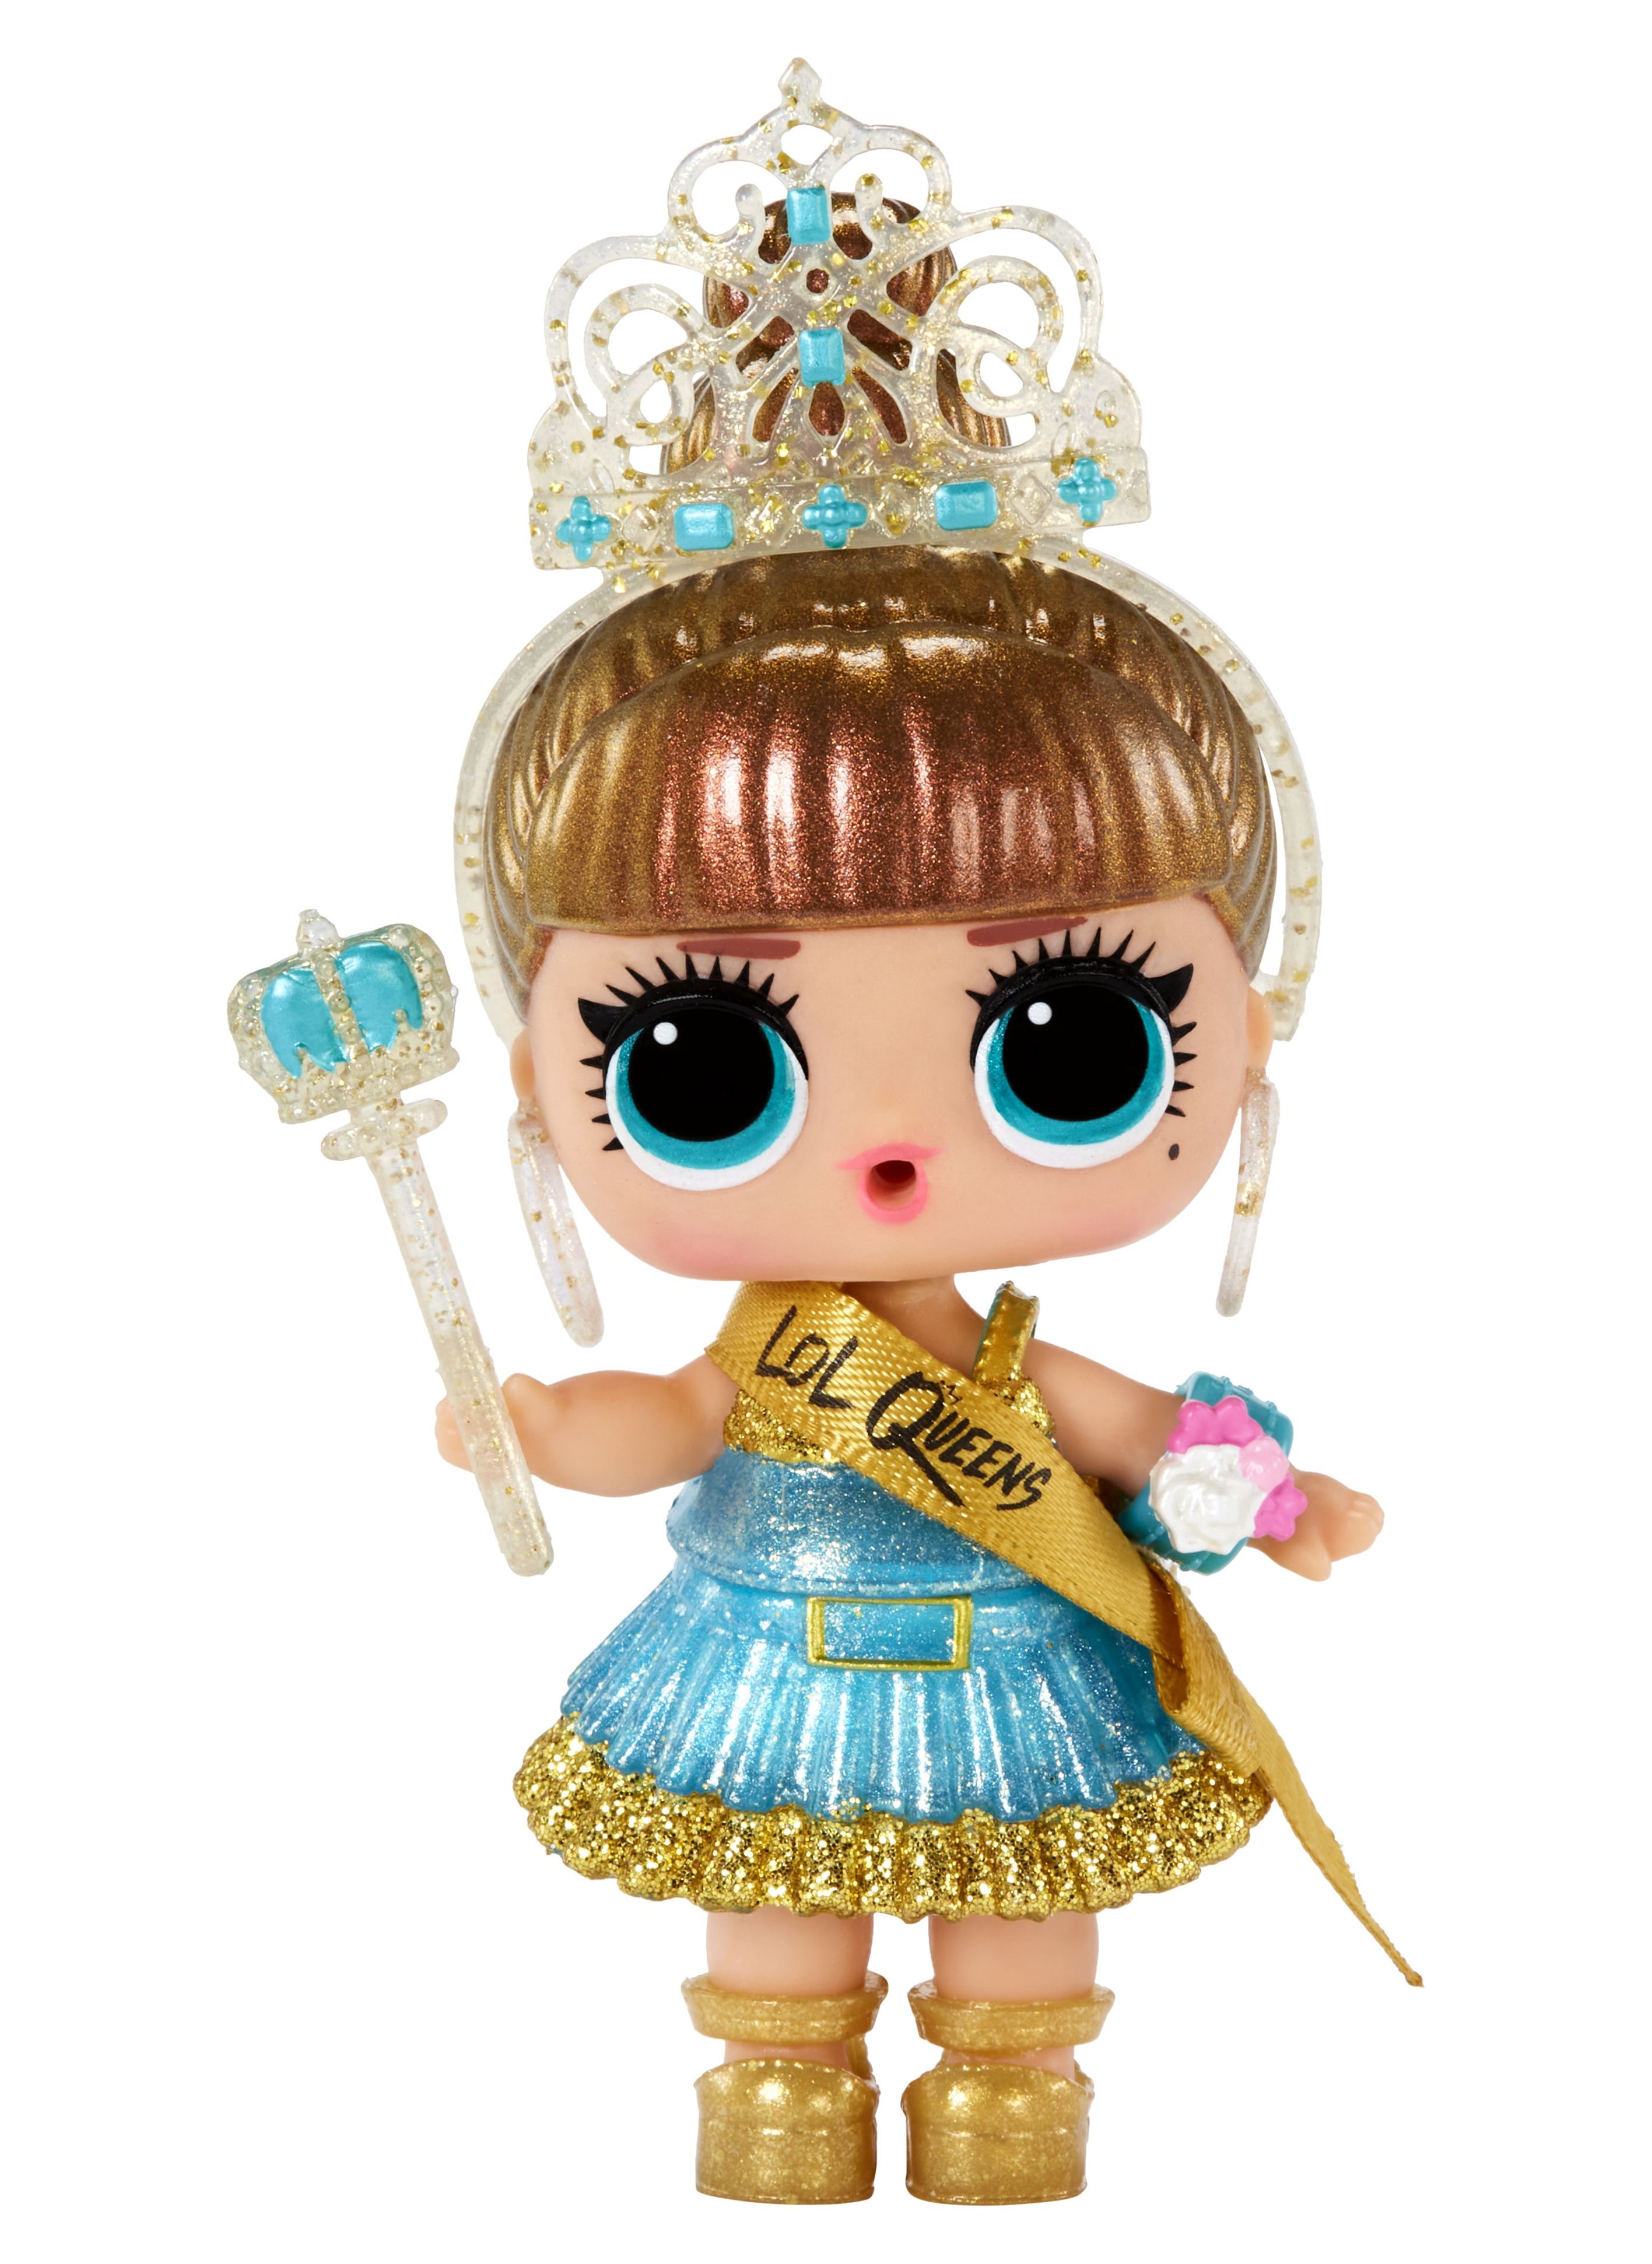 lol surprise queens dolls with 9 surprises including doll, fashions, and royal themed accessories - great gift for girls age 4+ - image 1 of 7